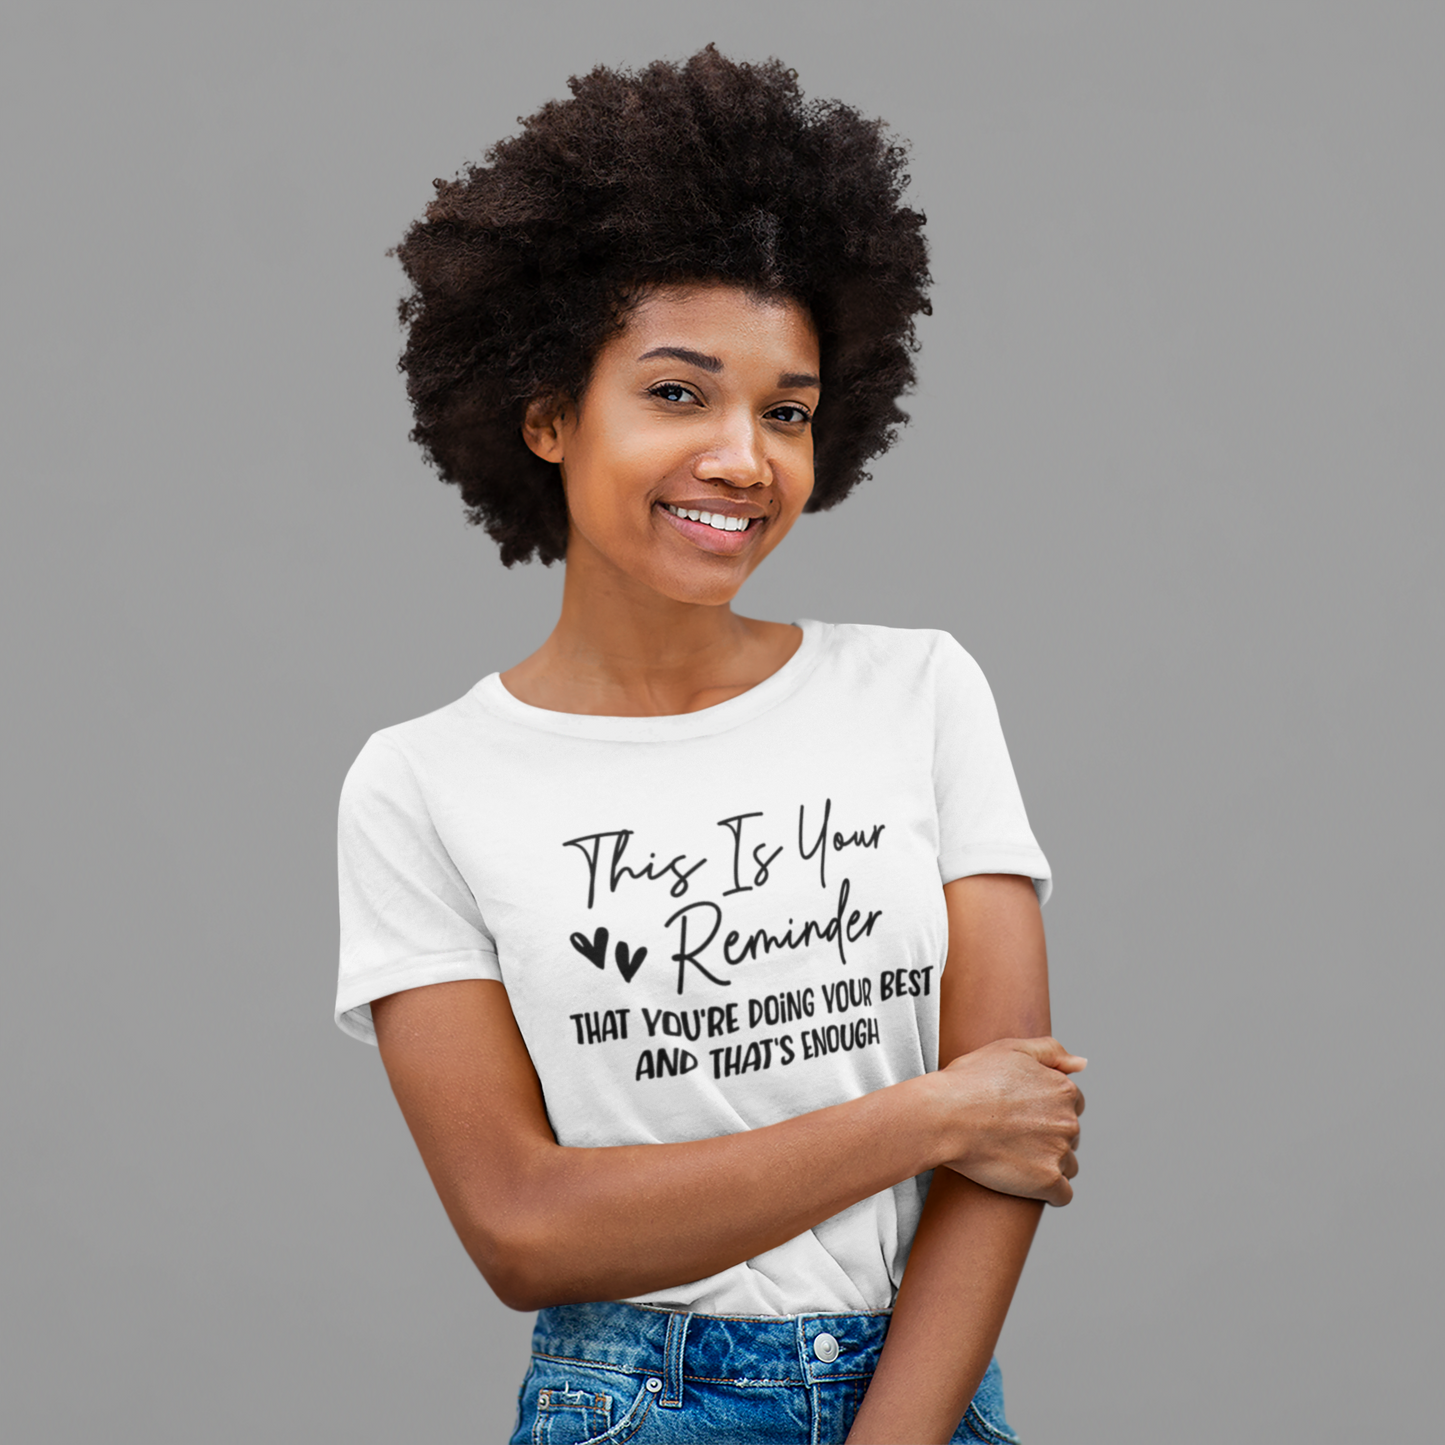 A woman wearing a white t-shirt that says "This is Your Reminder that You're Doing Your Best and That's Enough Tee (heart)" from Sharp Tact Kreativ | Tees & Gifts with Encouraging Messages to Brighten Your Day with a Bit of Wit.